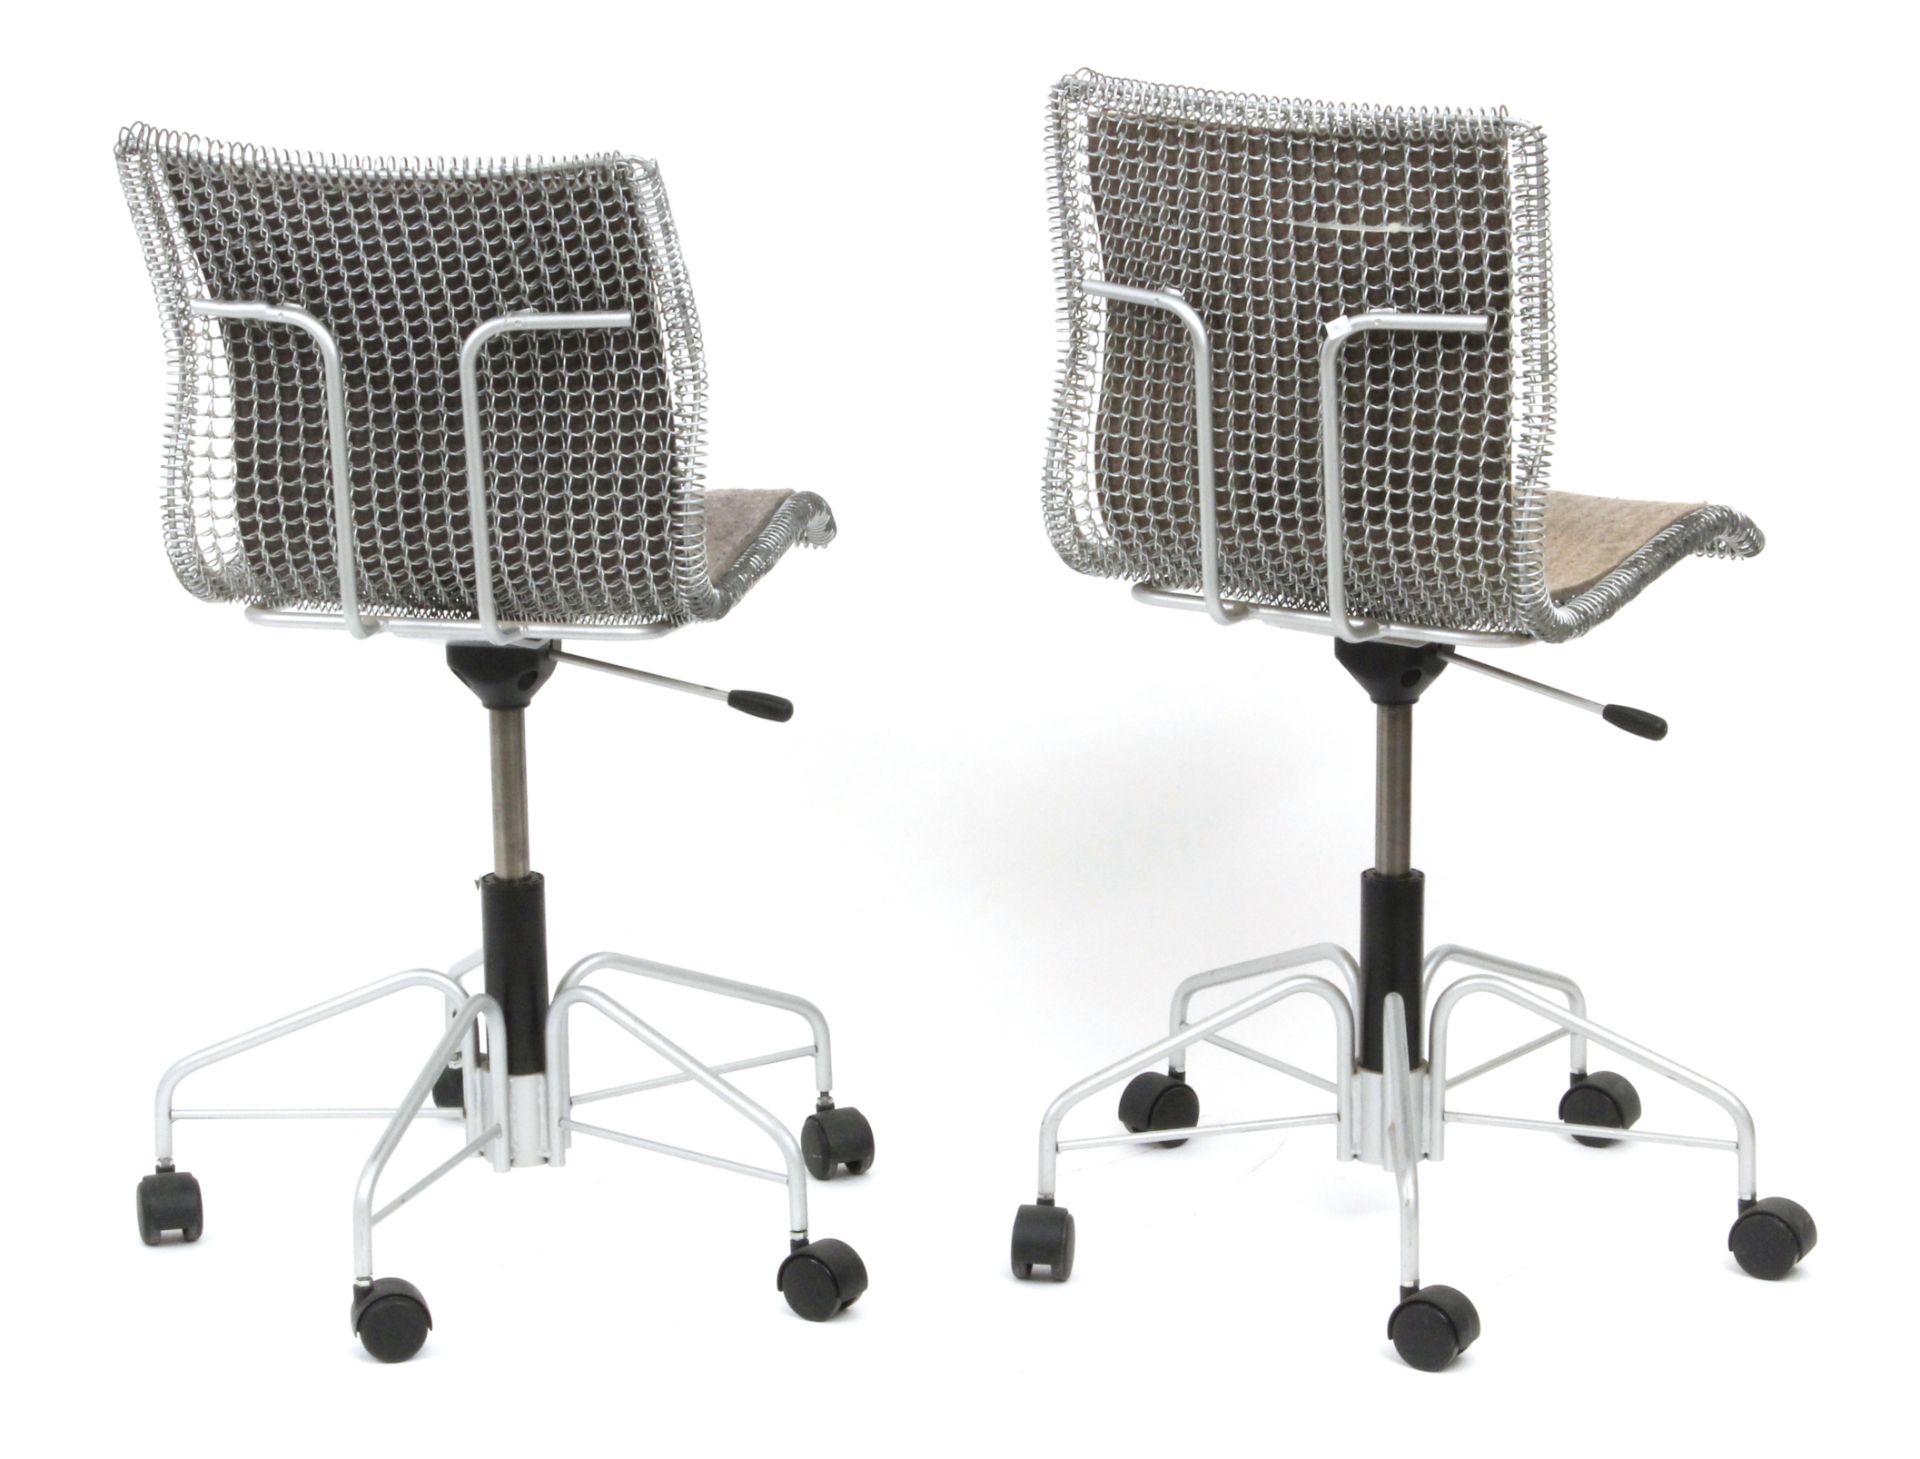 Niall O'Flynn for Spectrum circa 1997. A pair of Rascal chairs - Image 3 of 3